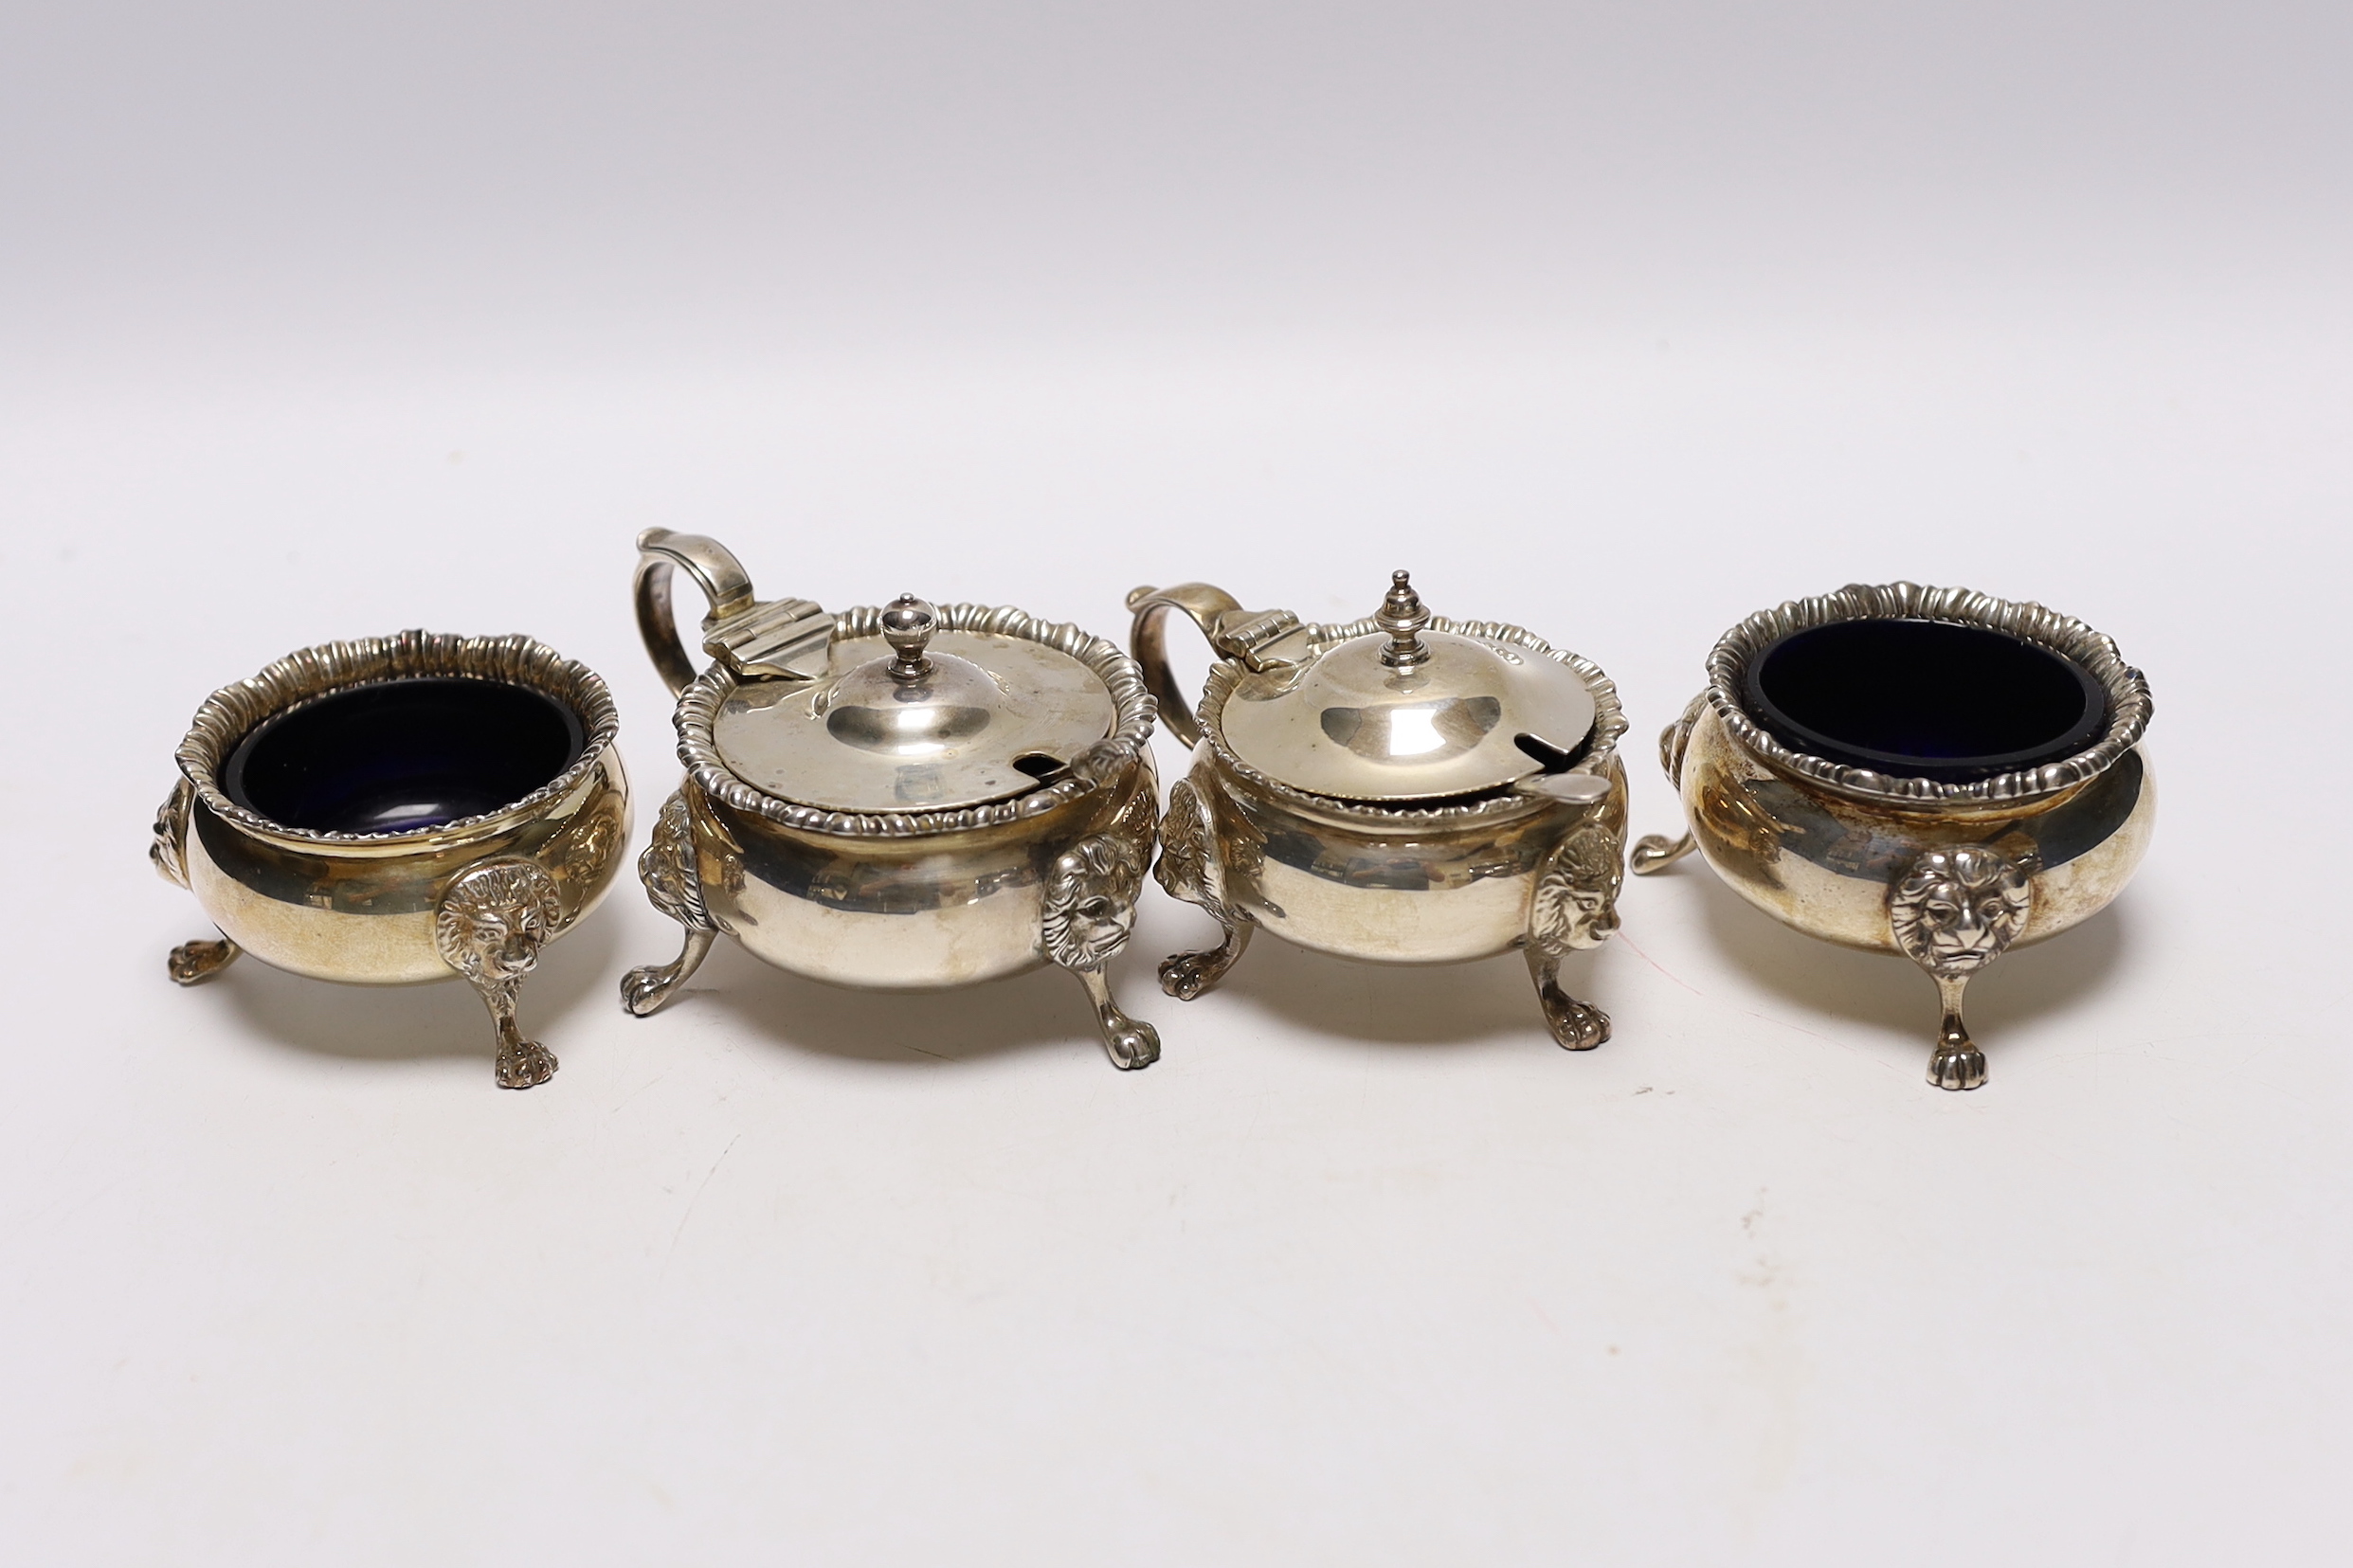 An Elizabeth II silver four piece condiment set by Garrard & Co, London, 1971/73, with blue glass liners and two associated spoons.